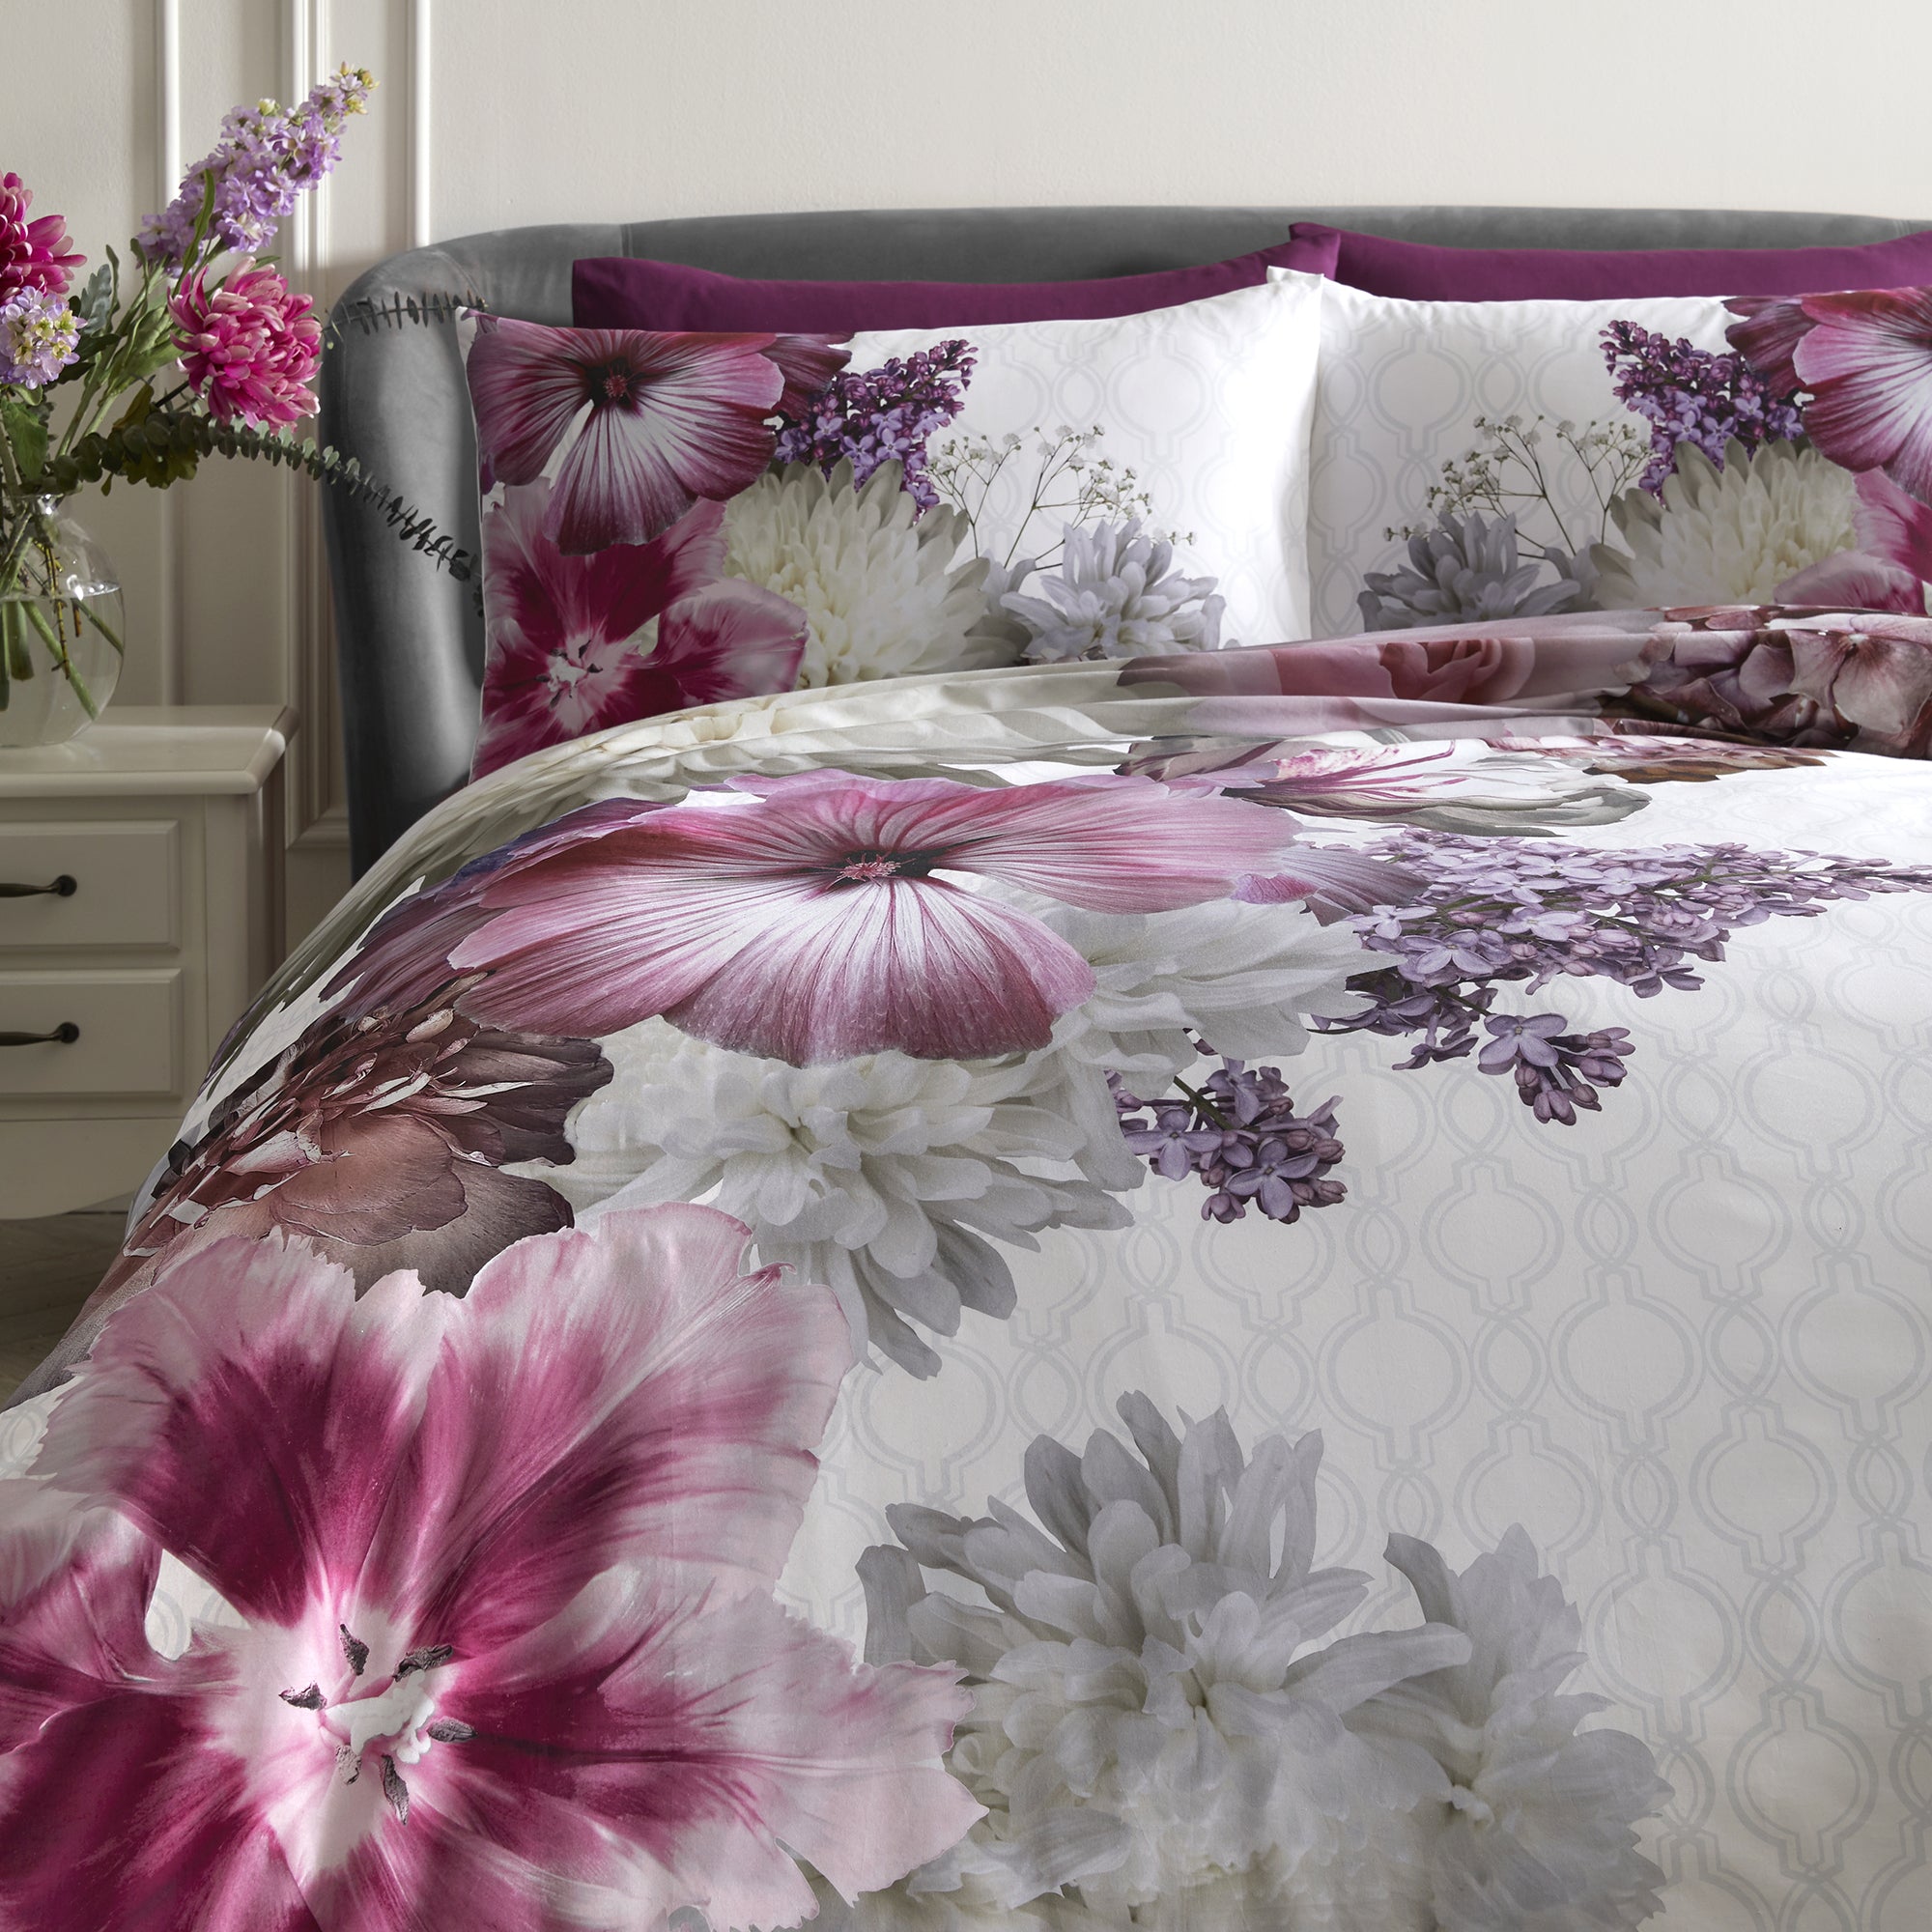 Mayfair Lady - 100% Cotton Duvet Cover Set by Laurence Llewelyn-Bowen